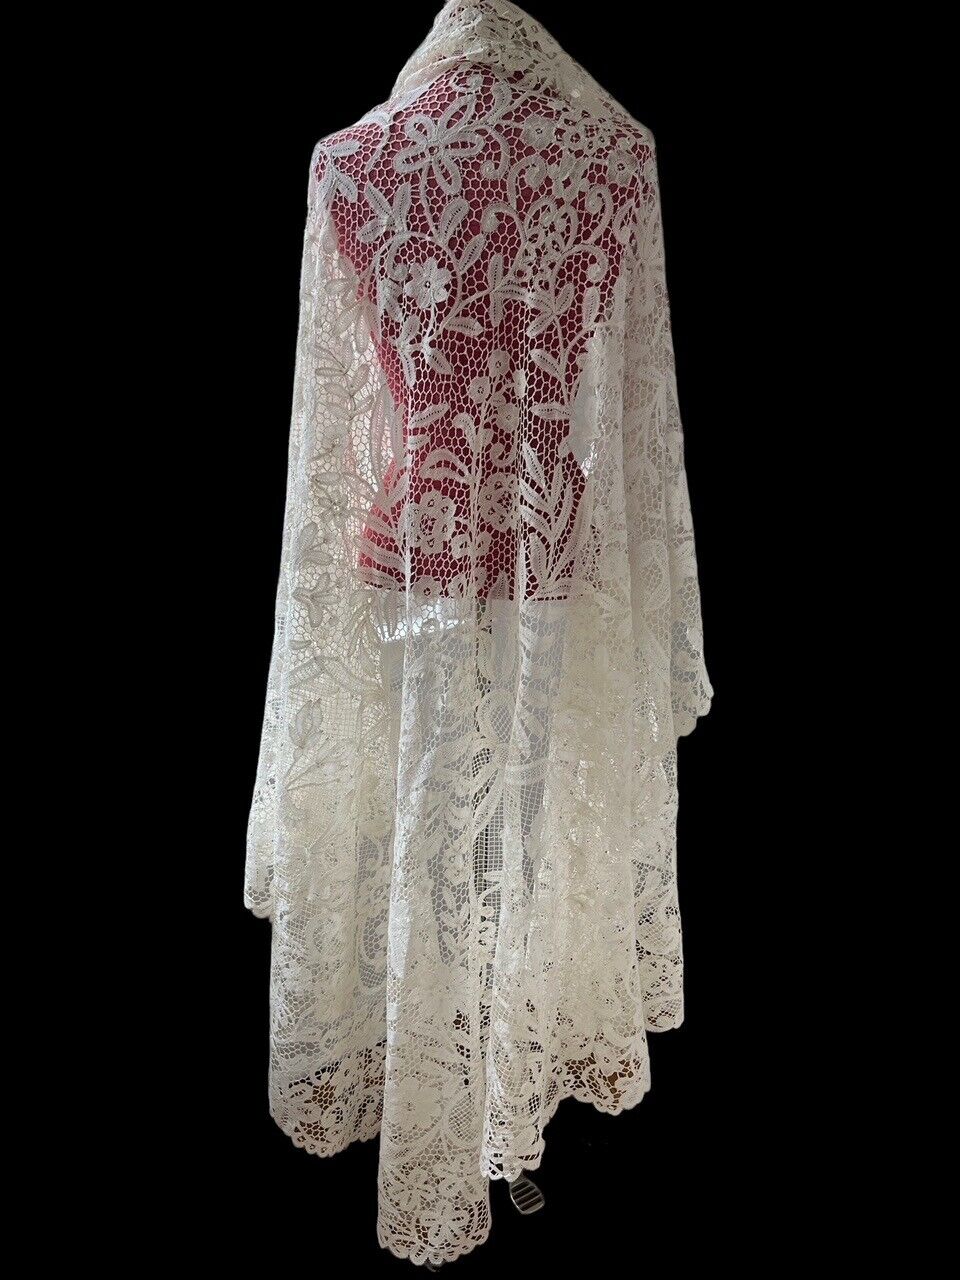 ANTIQUE LACE  - CIRCA 19THC.HAND MADE BRUGE LACE SHAWL W/BOWS,FLOWERS